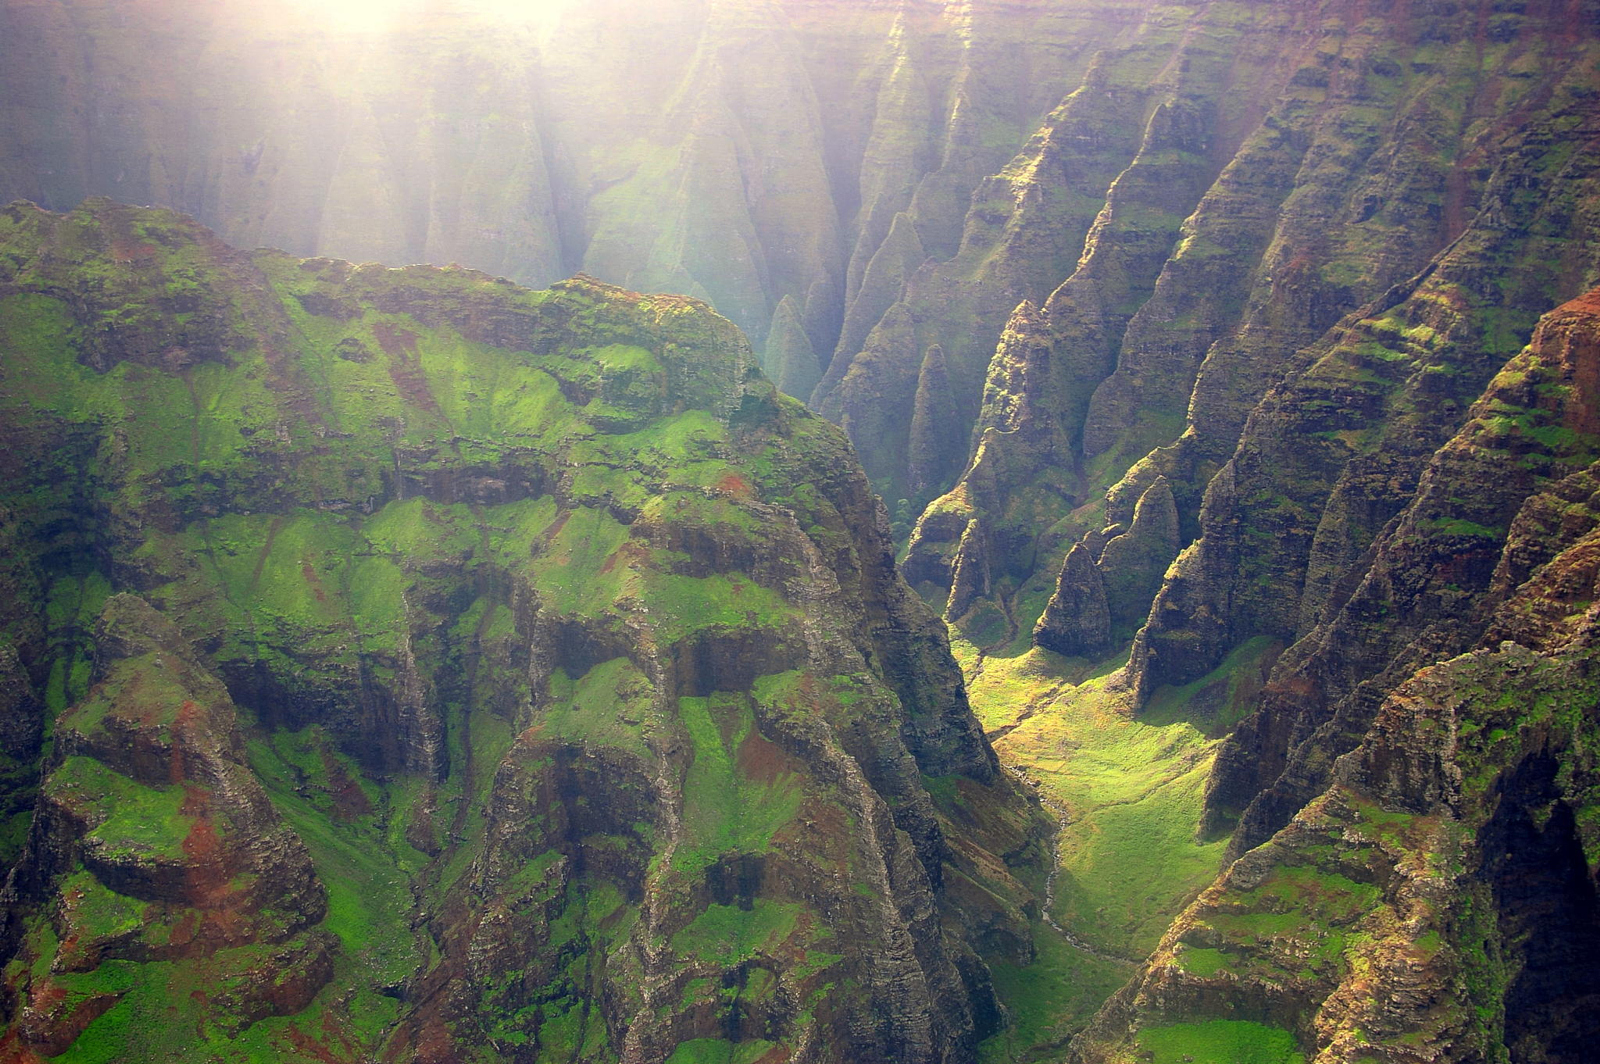 Photos from 3 Gorgeous Jurassic World Filming Locations